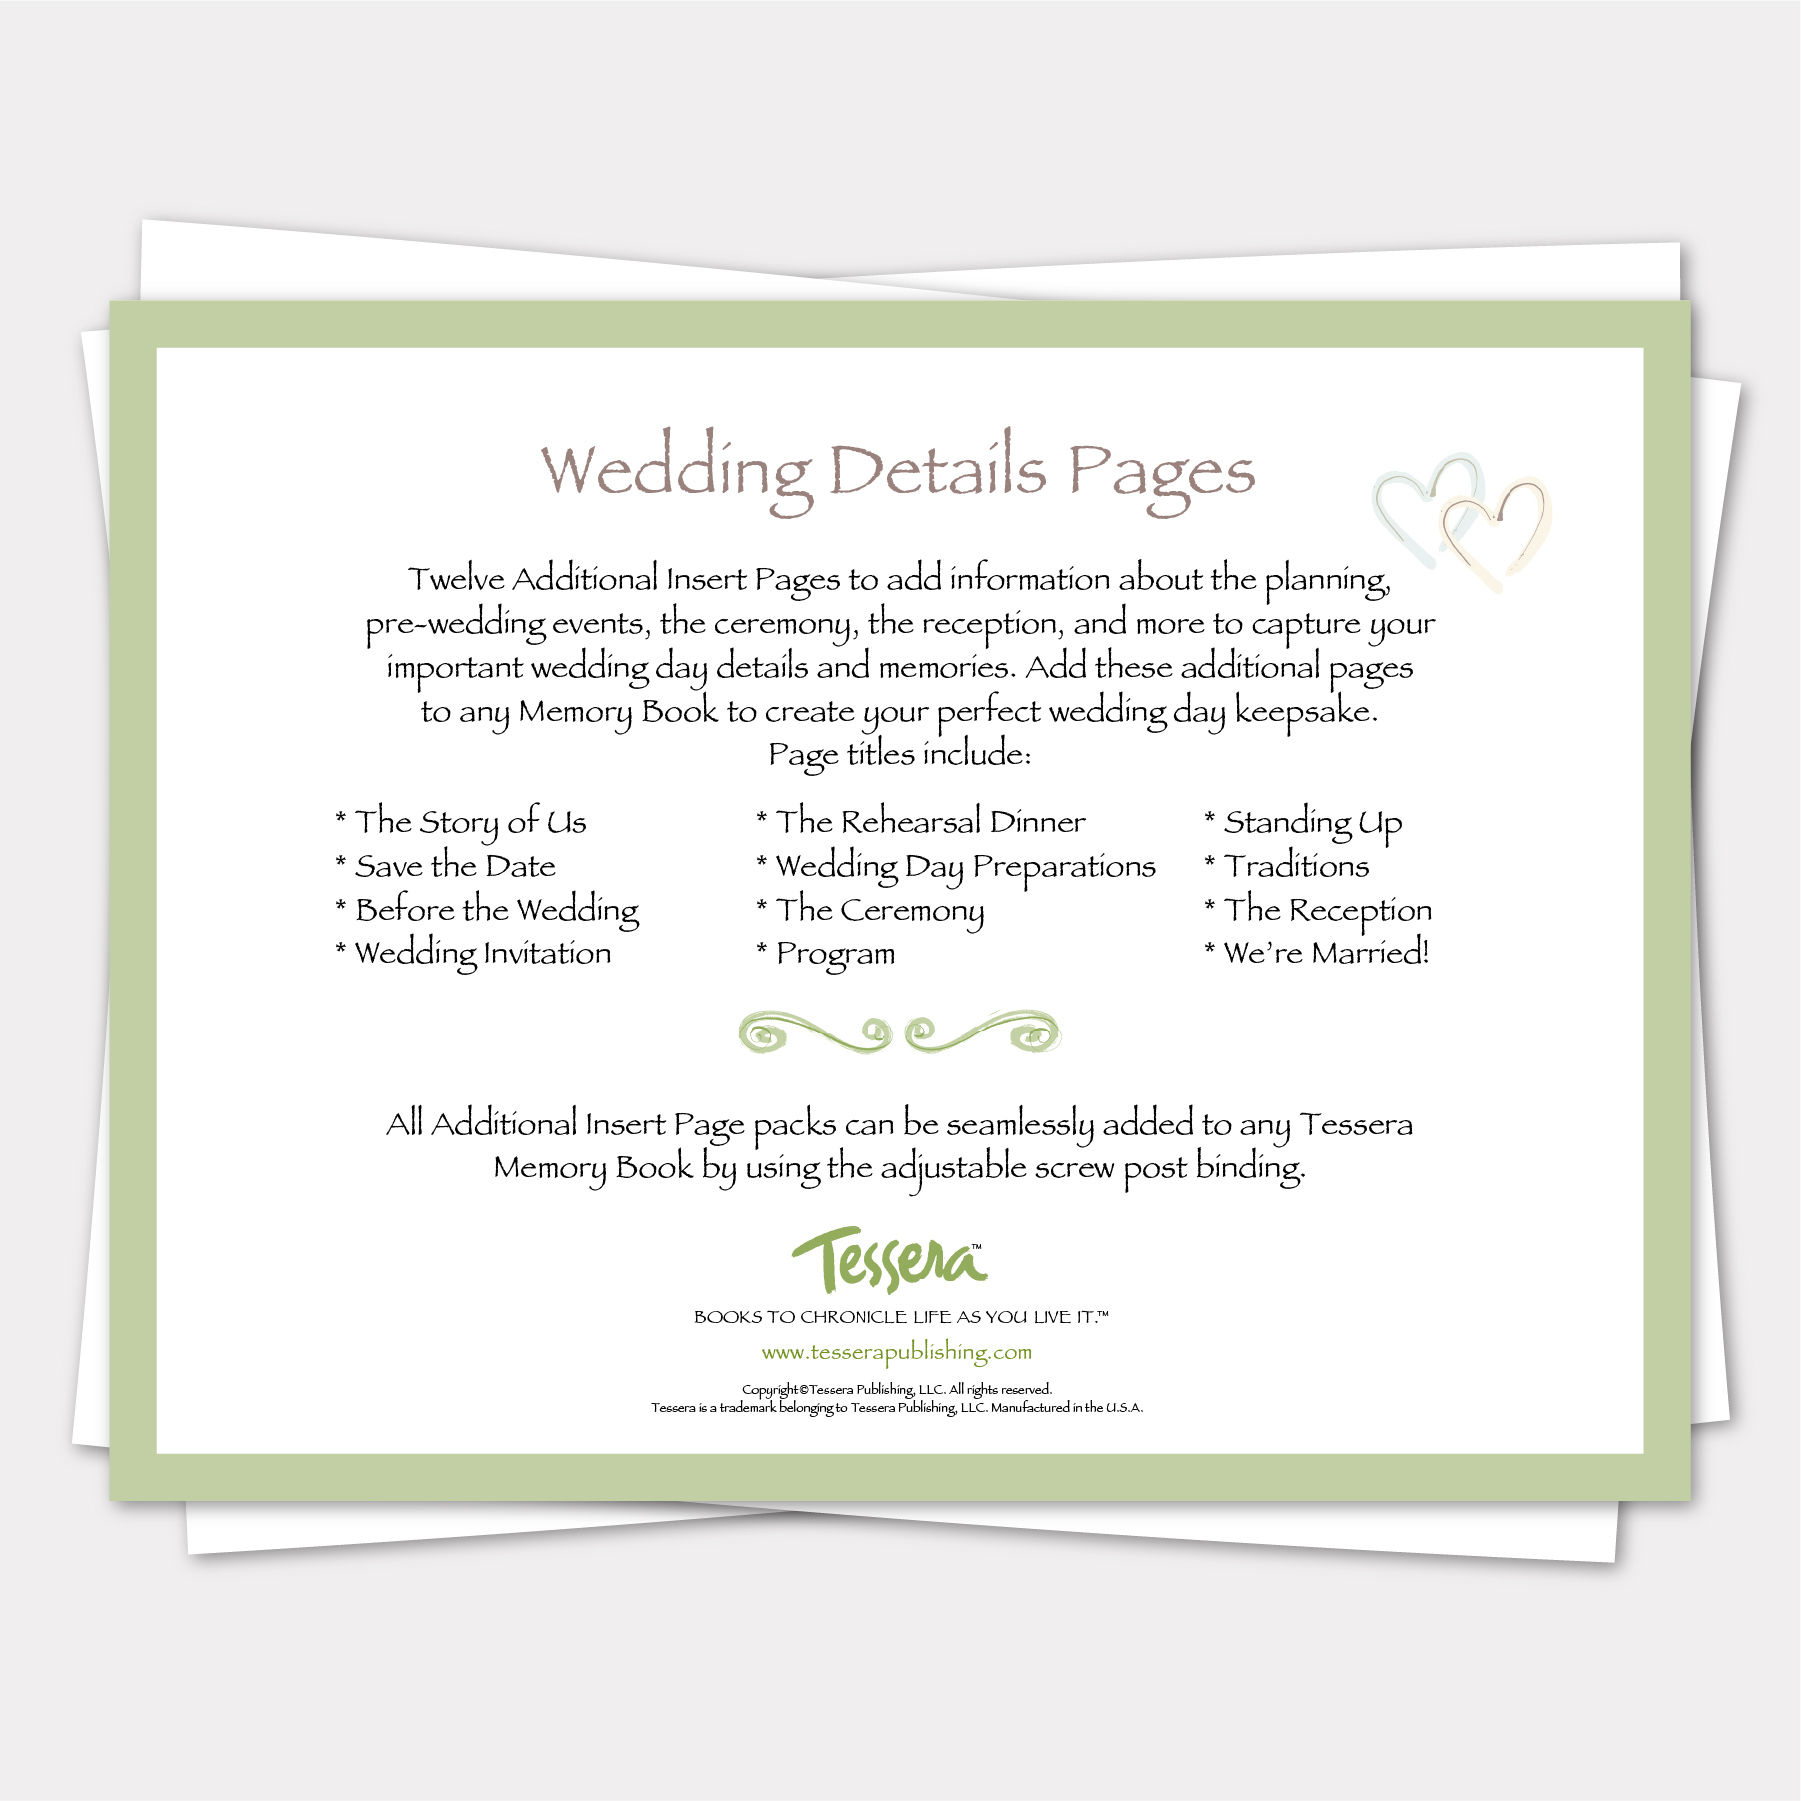 wedding details pages for tessera memory books